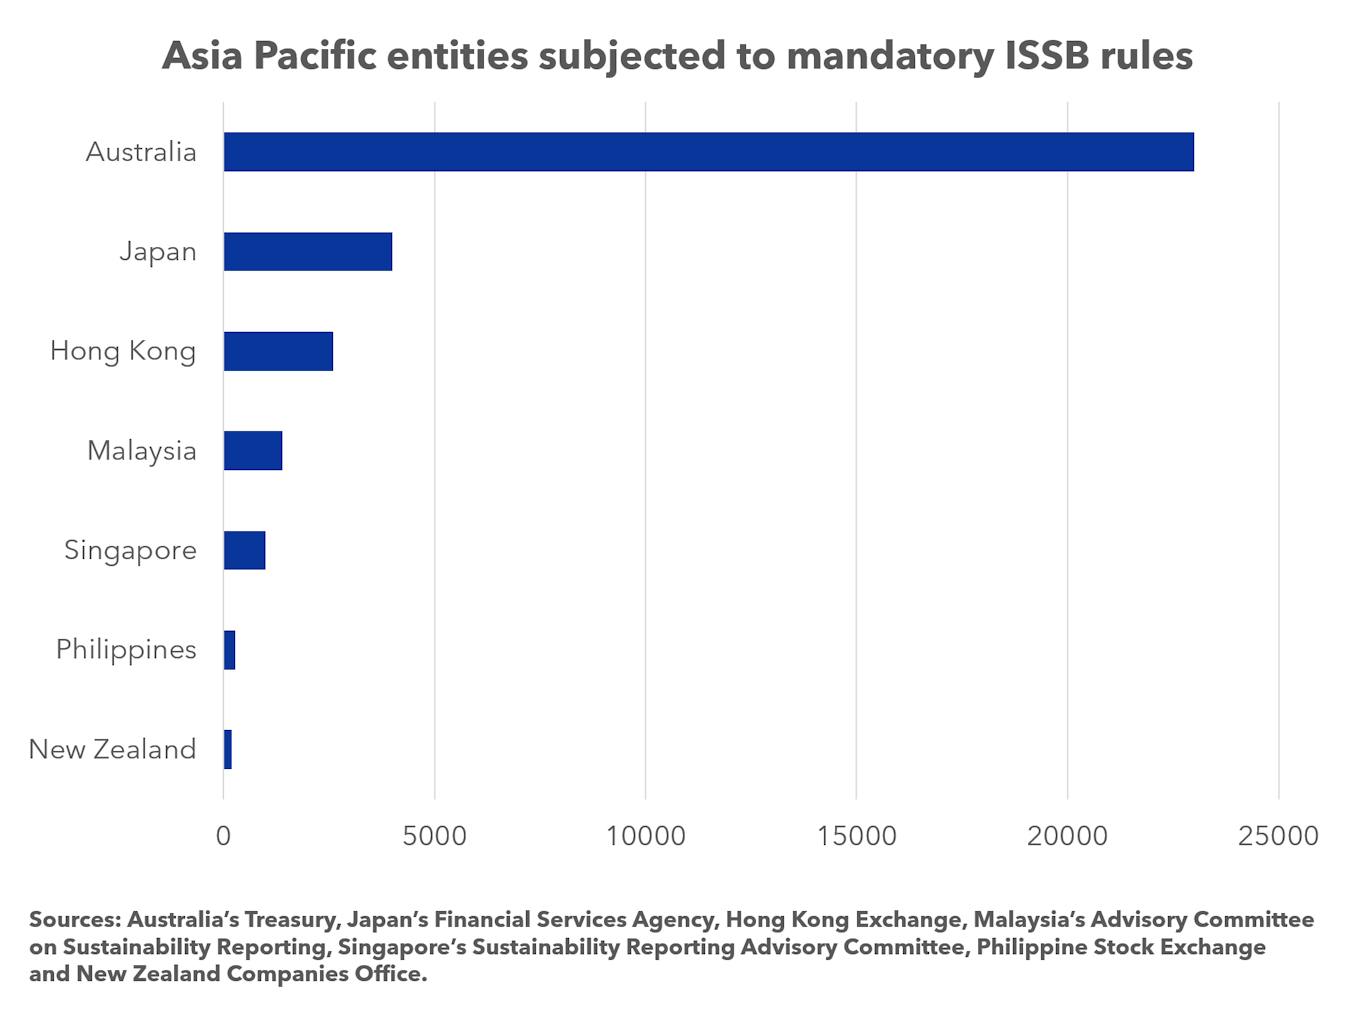 Over 32,400 Asia Pacific firms are estimated to be affected by mandatory ISSB rules